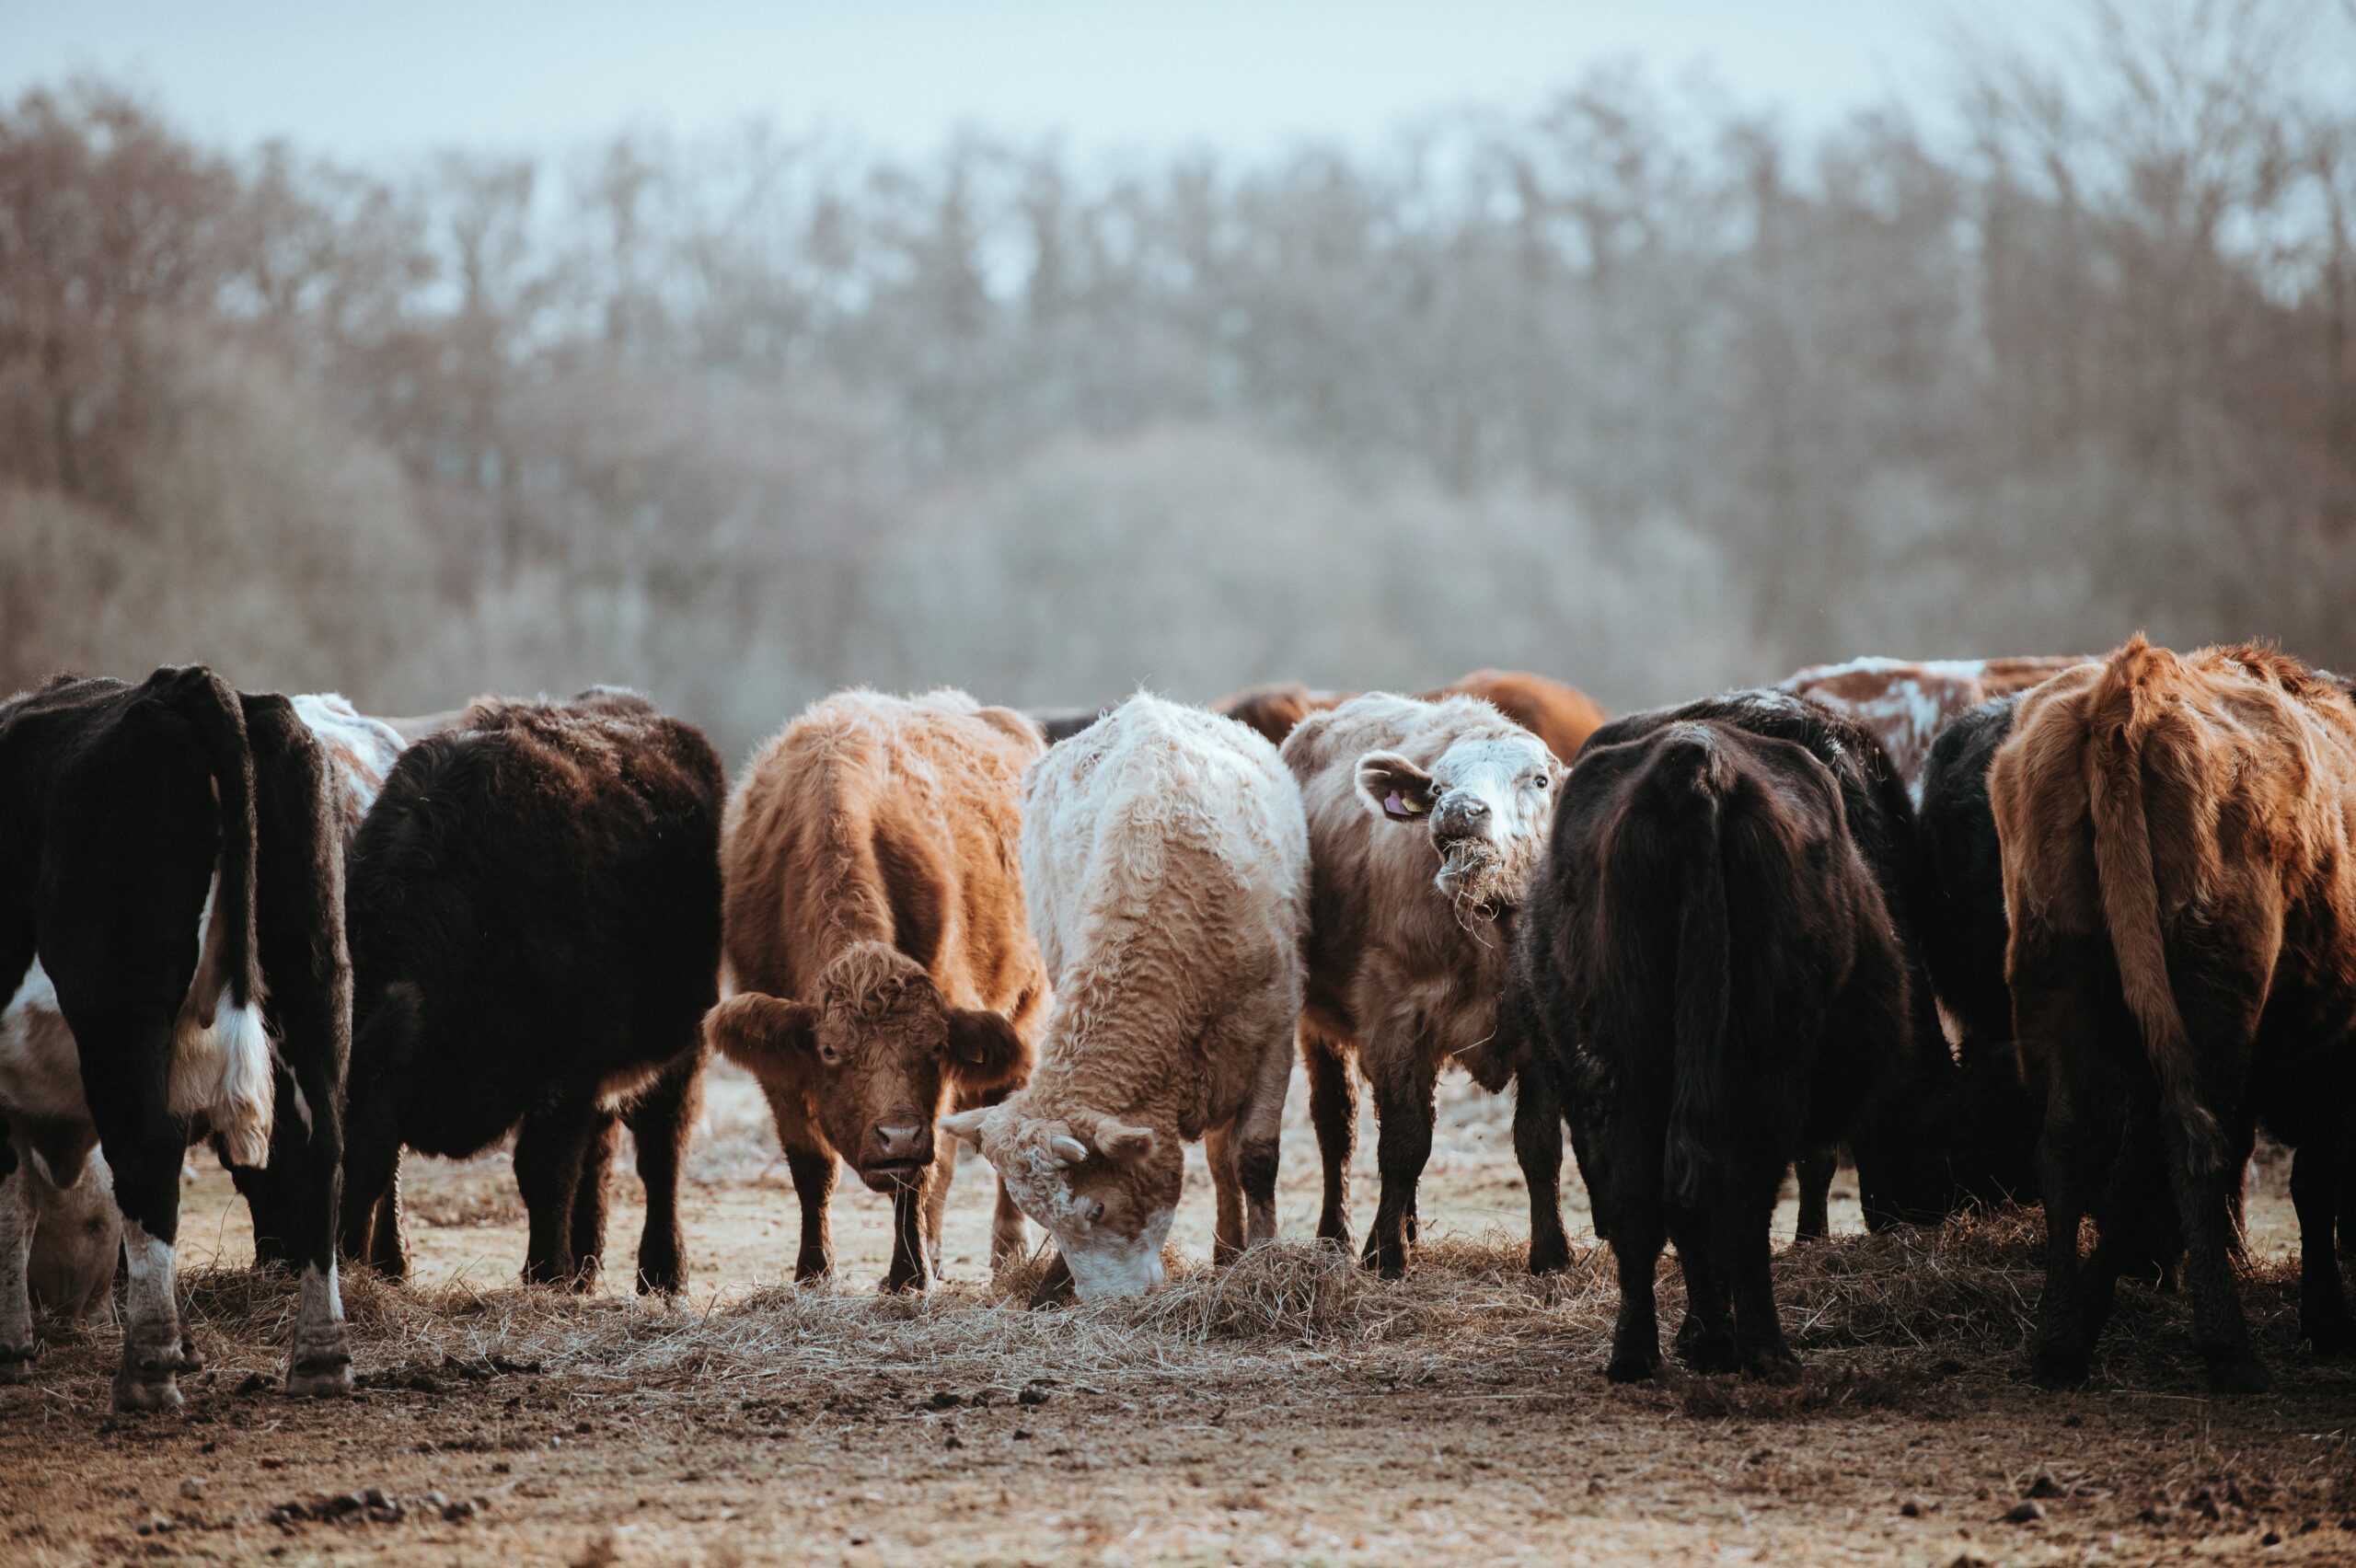 A grouping of cattle, lighter brown to darker brown, grazing or sniffing the ground on a dusty area.